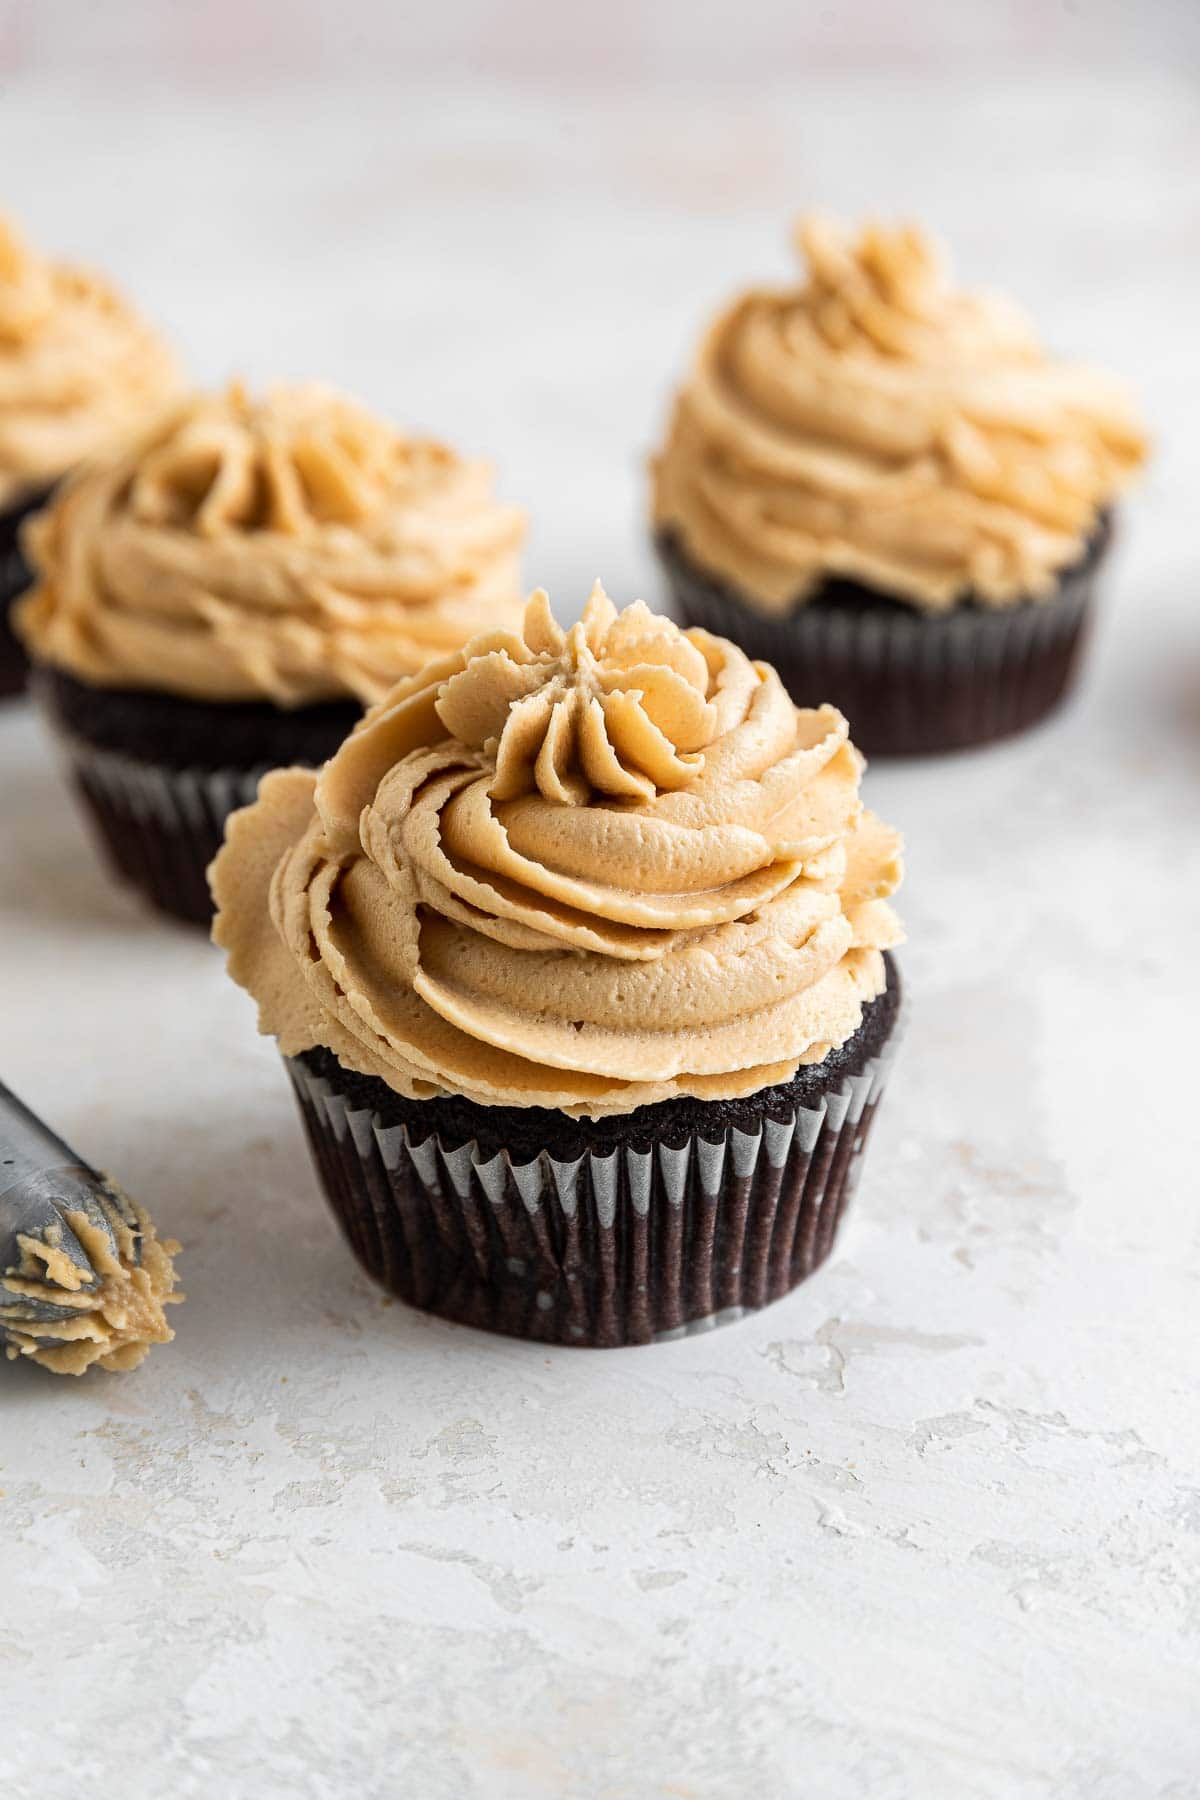 Peanut butter frosting piped on chocolate cupcakes.